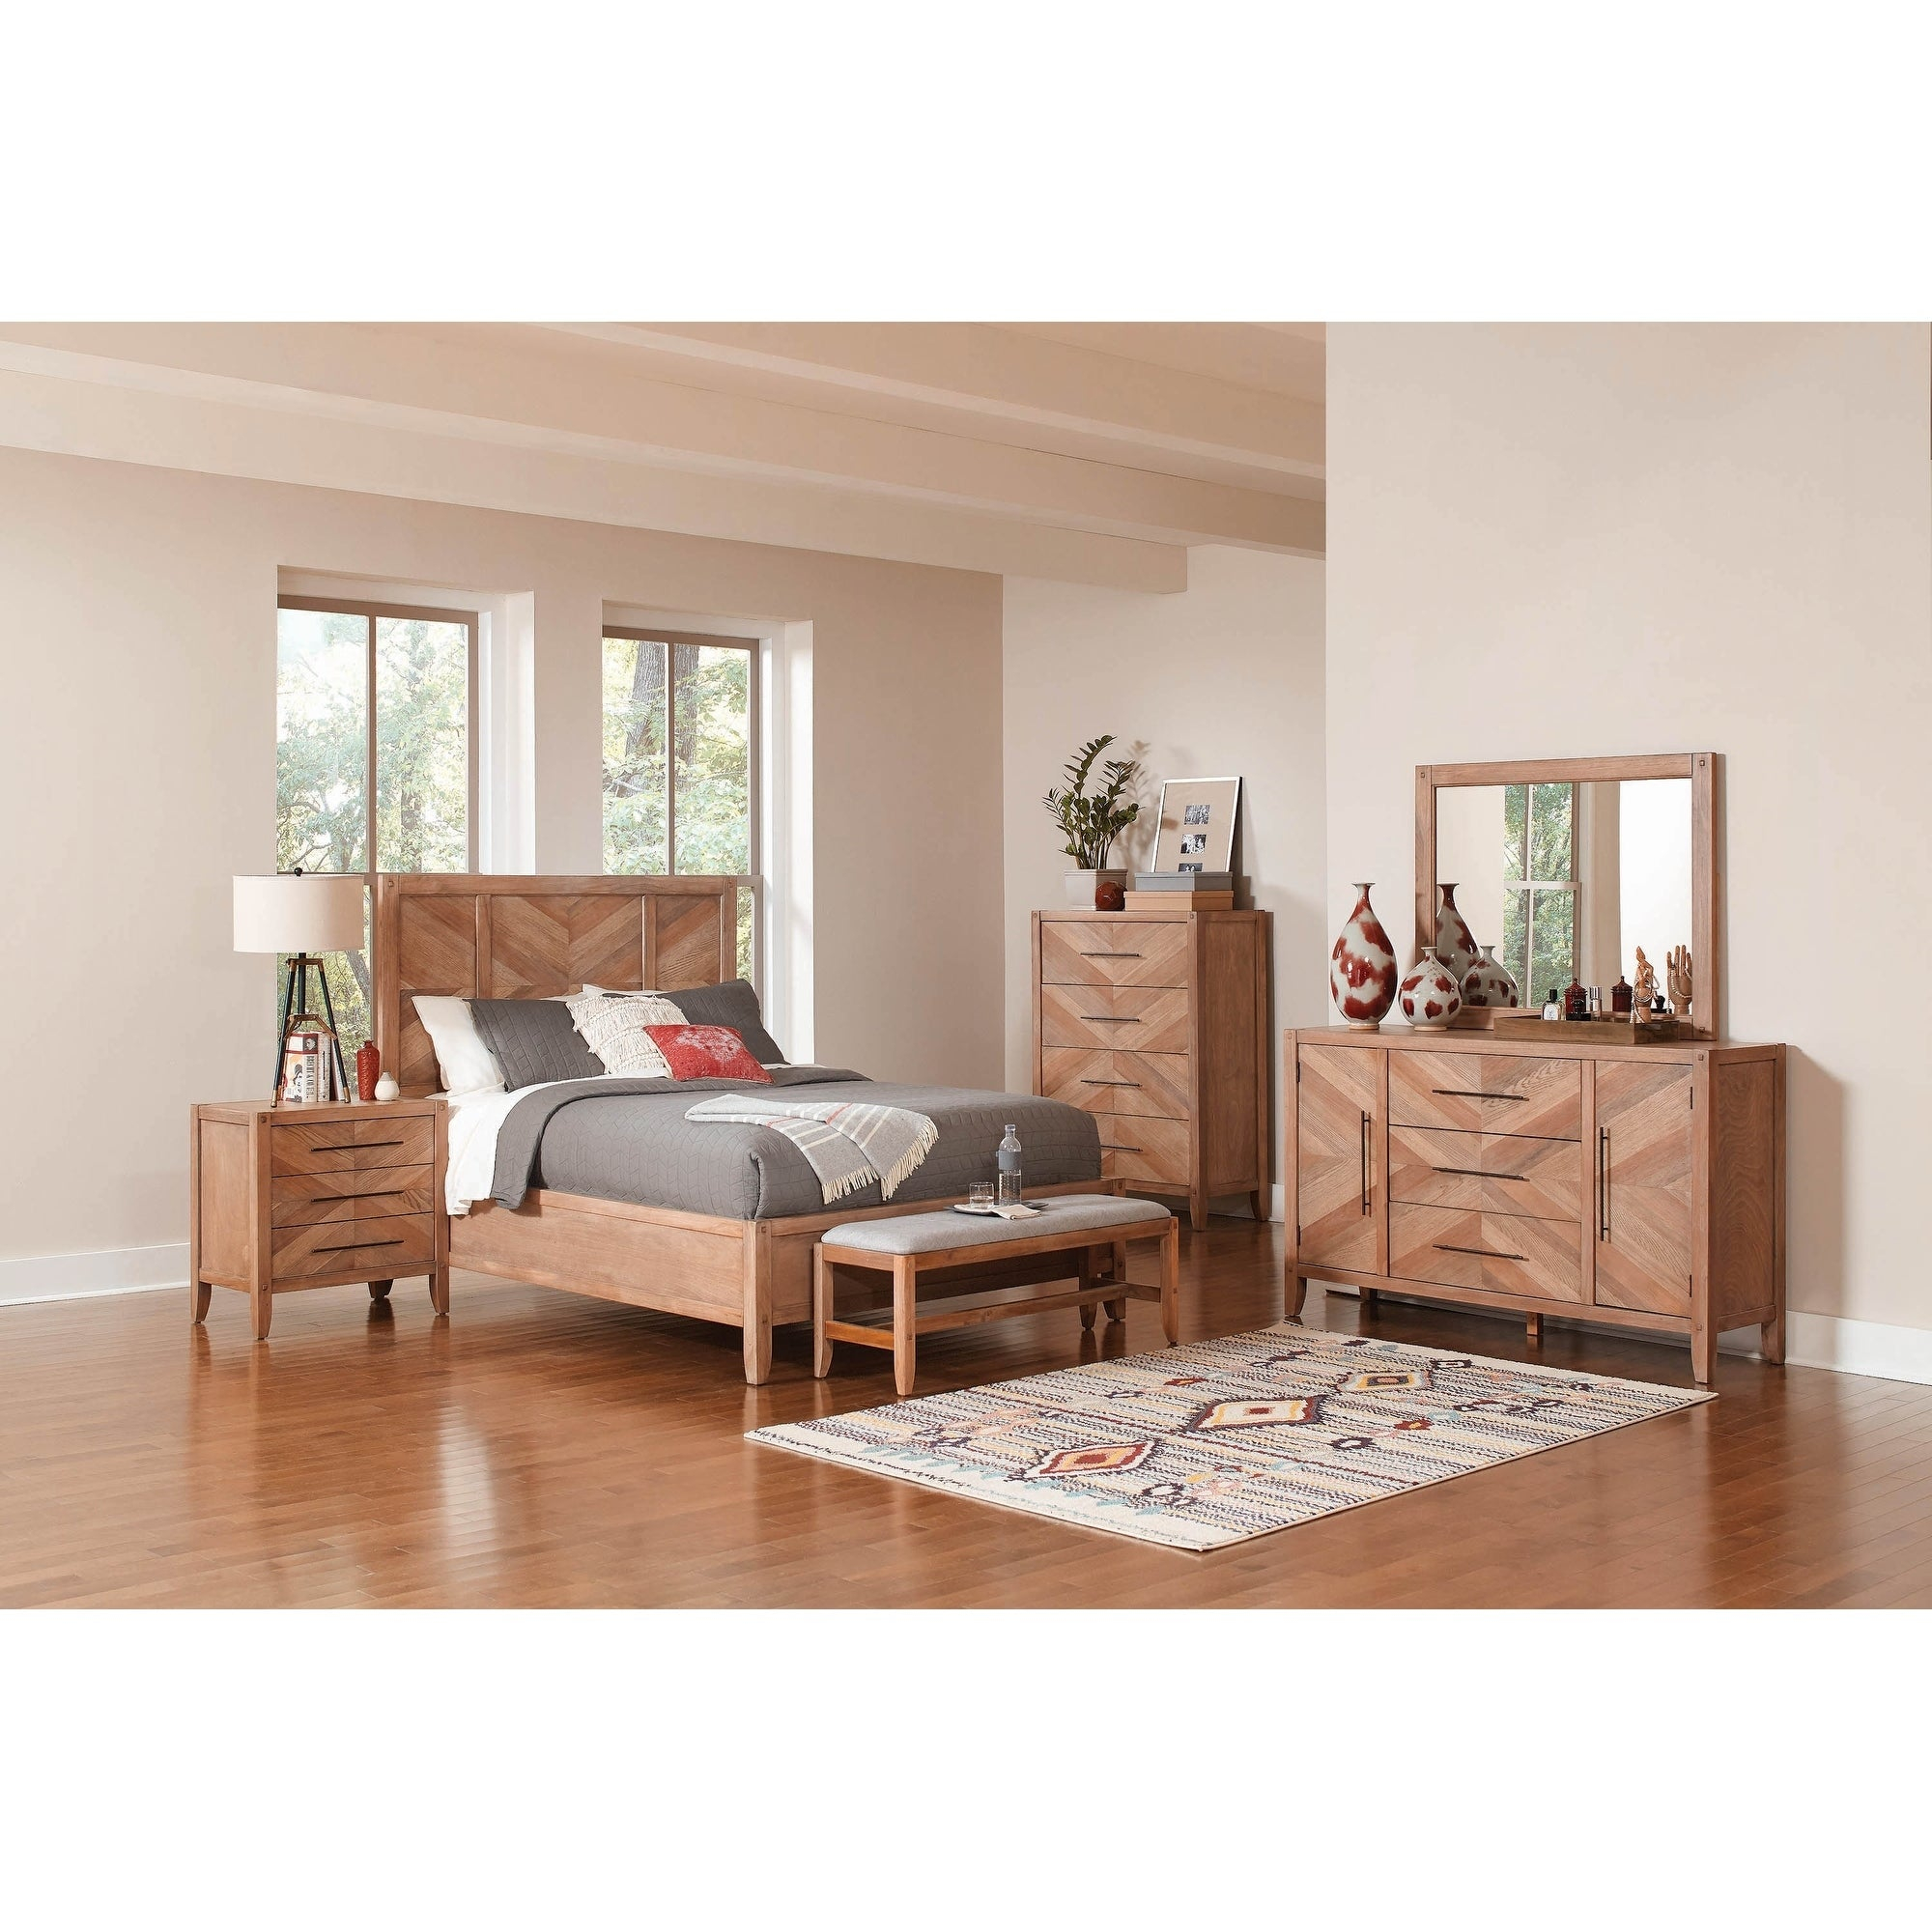 Pensacola White Washed Natural 5 Piece Bedroom Set With 2 Nightstands intended for dimensions 2000 X 2000